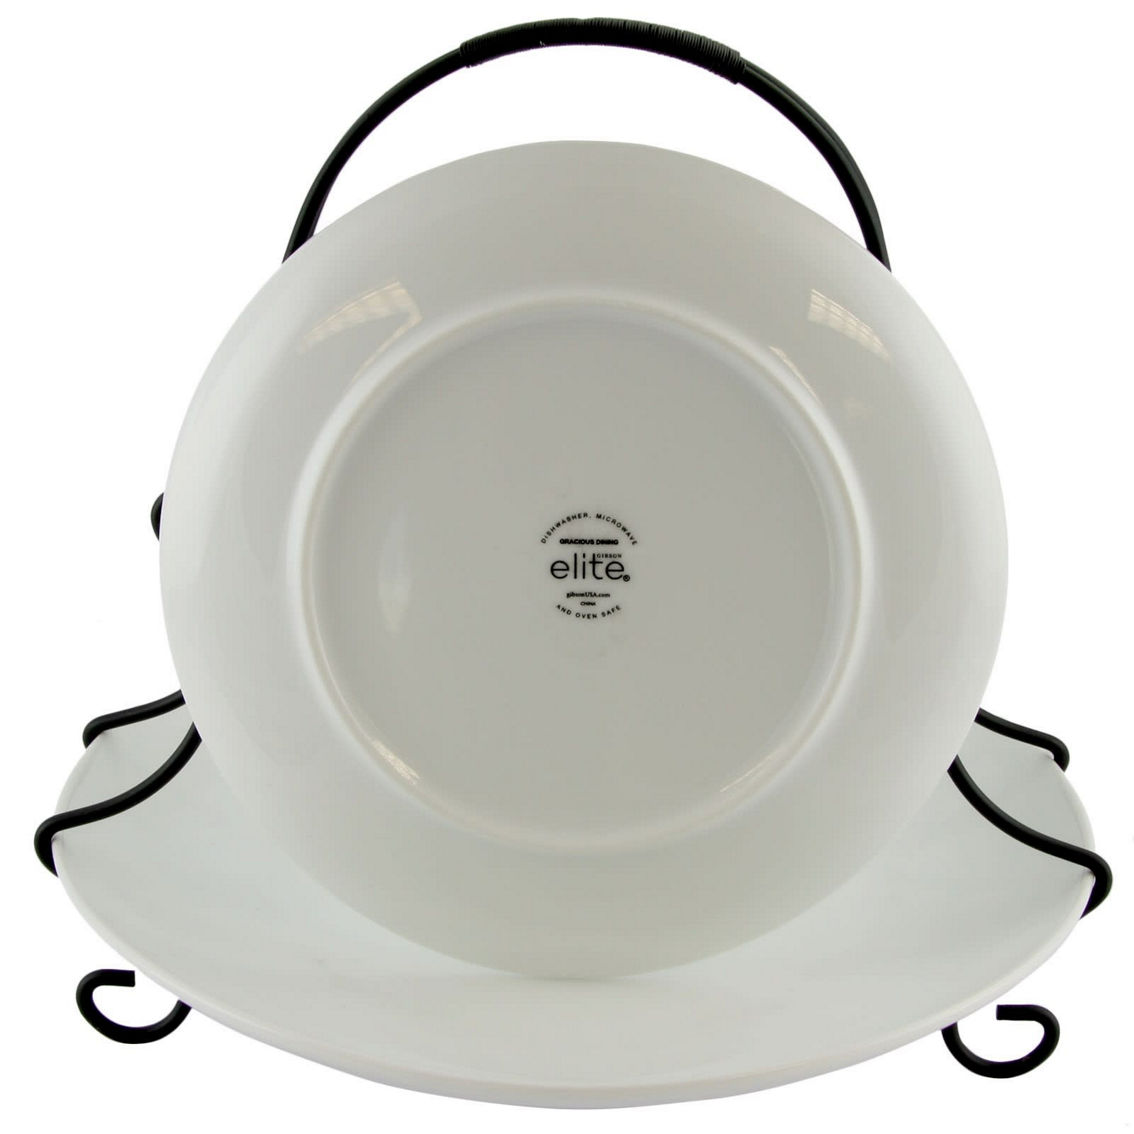 Gibson Elite Splendid Grace 2 Tiered Serving Set with Metal Rack in  White - Image 3 of 5